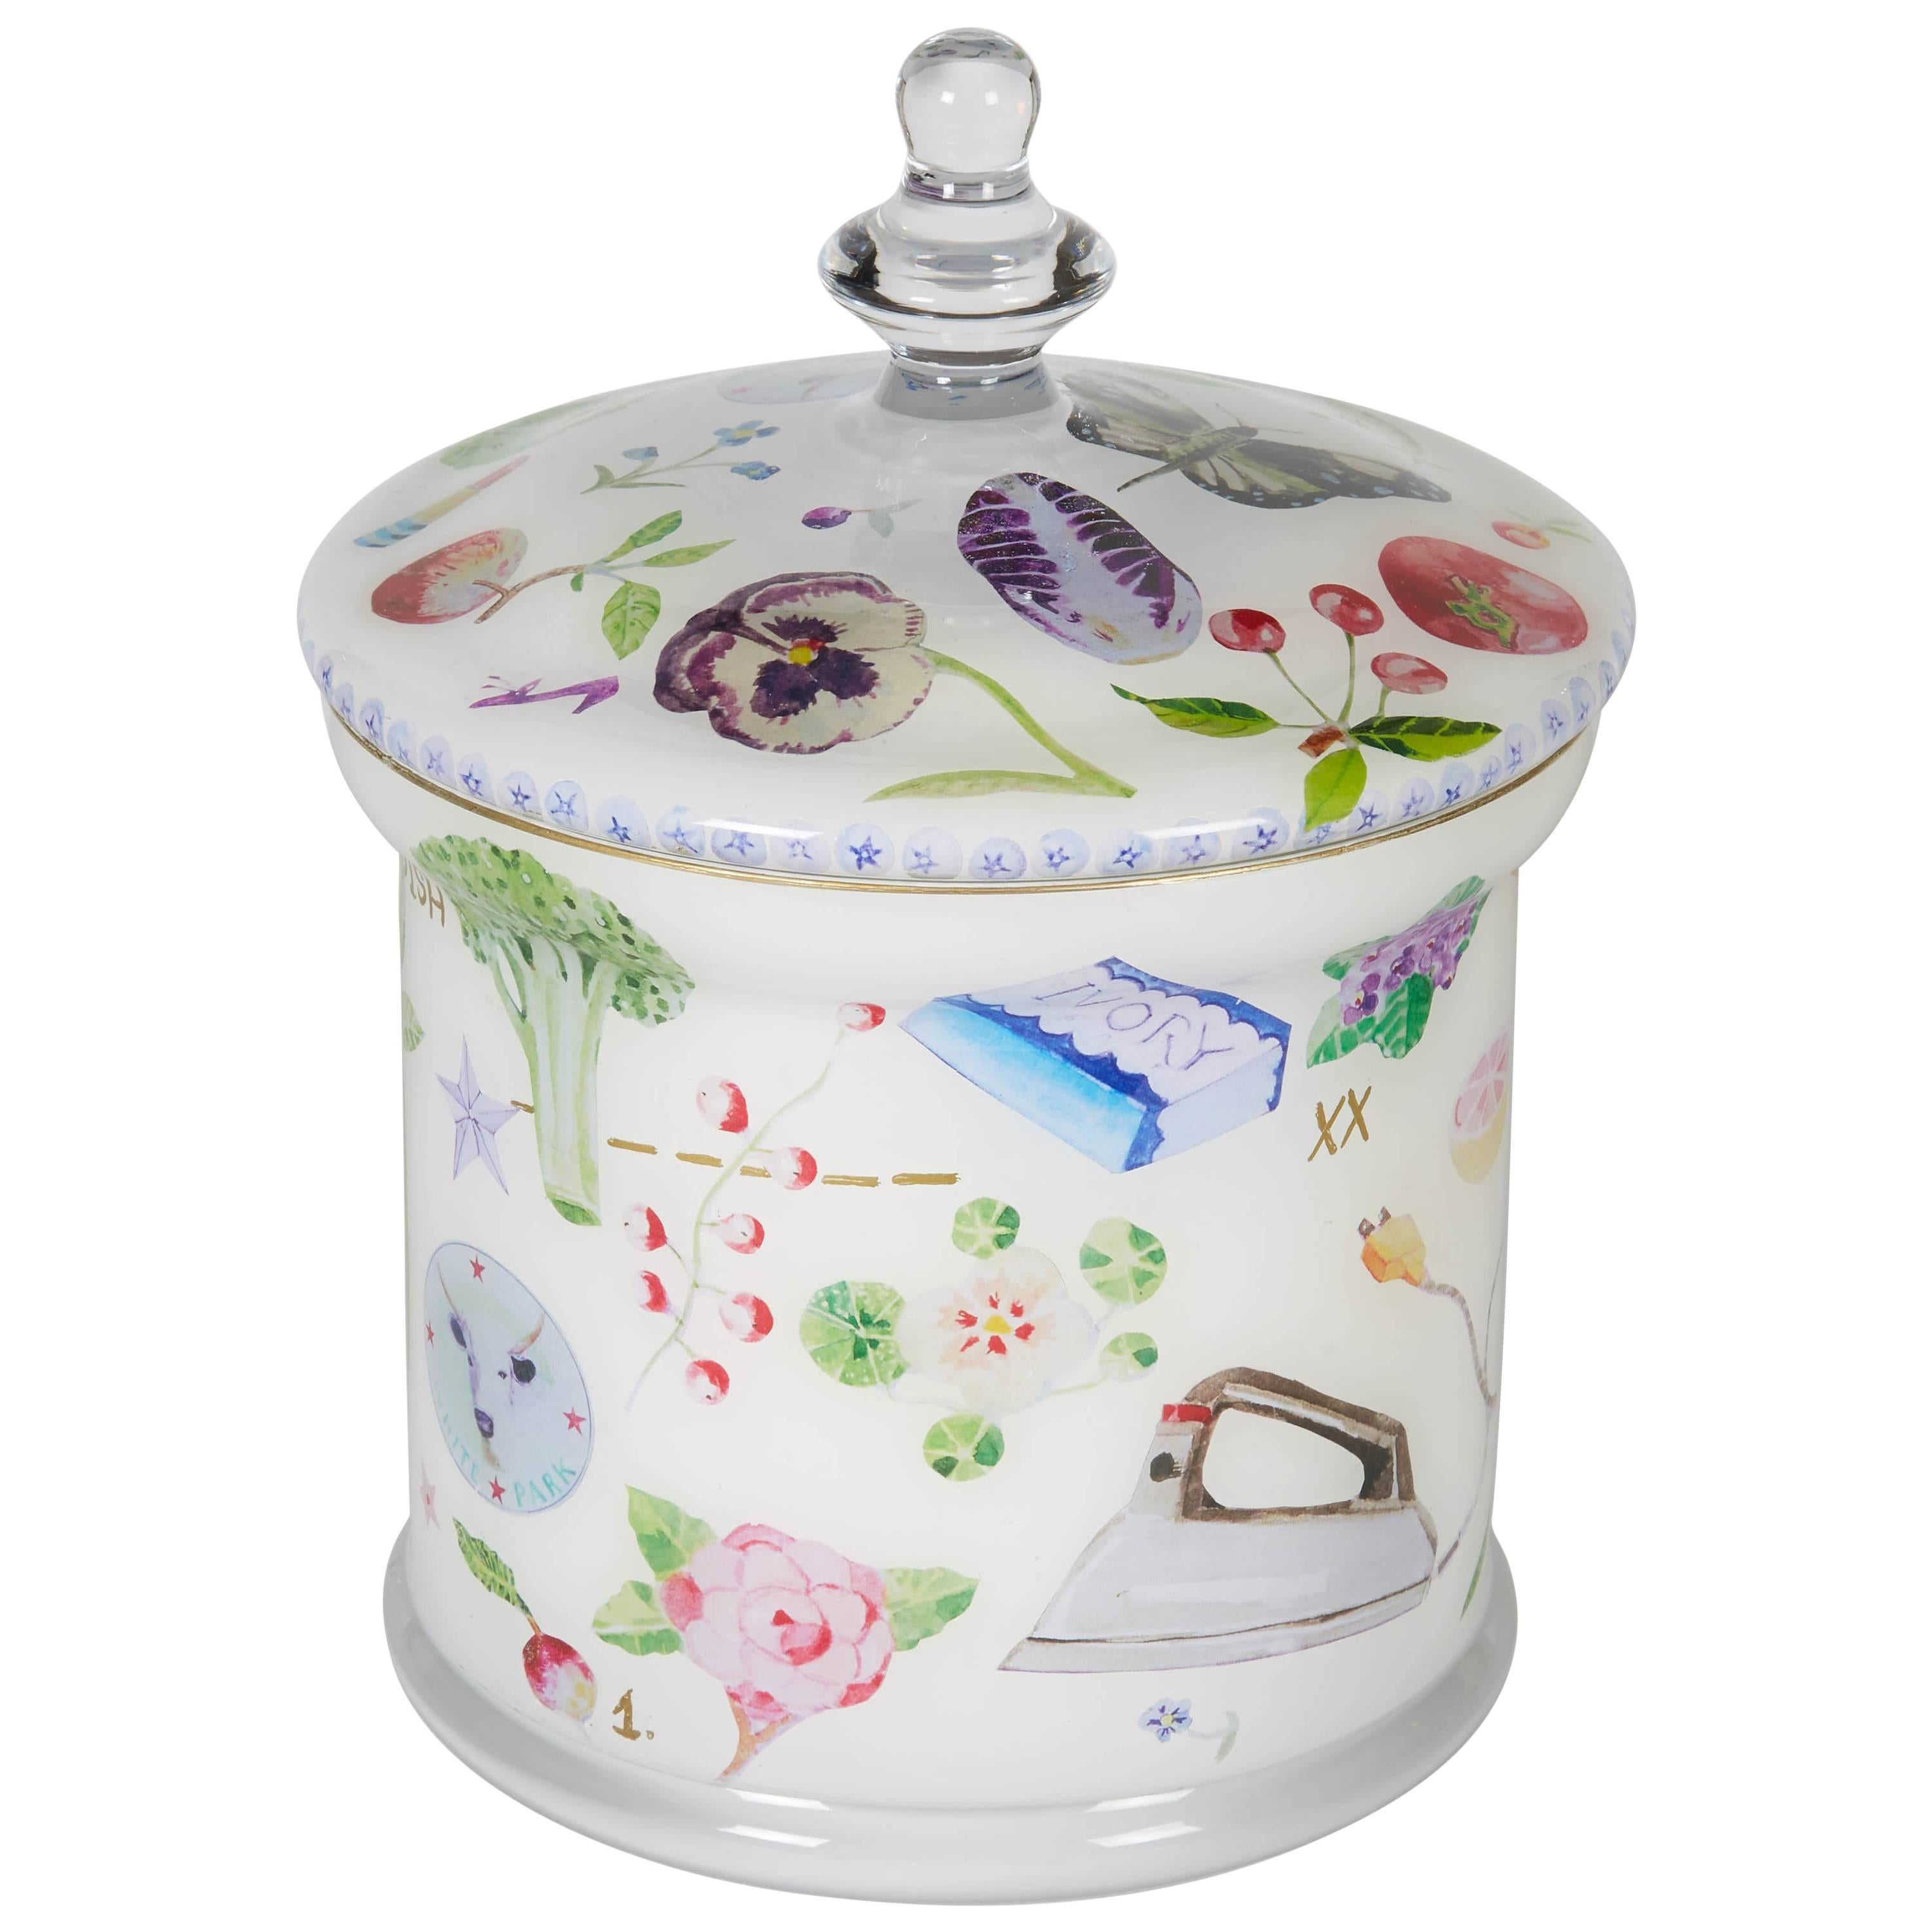 Cathy Graham Decoupage Apothecary Jar For Sale